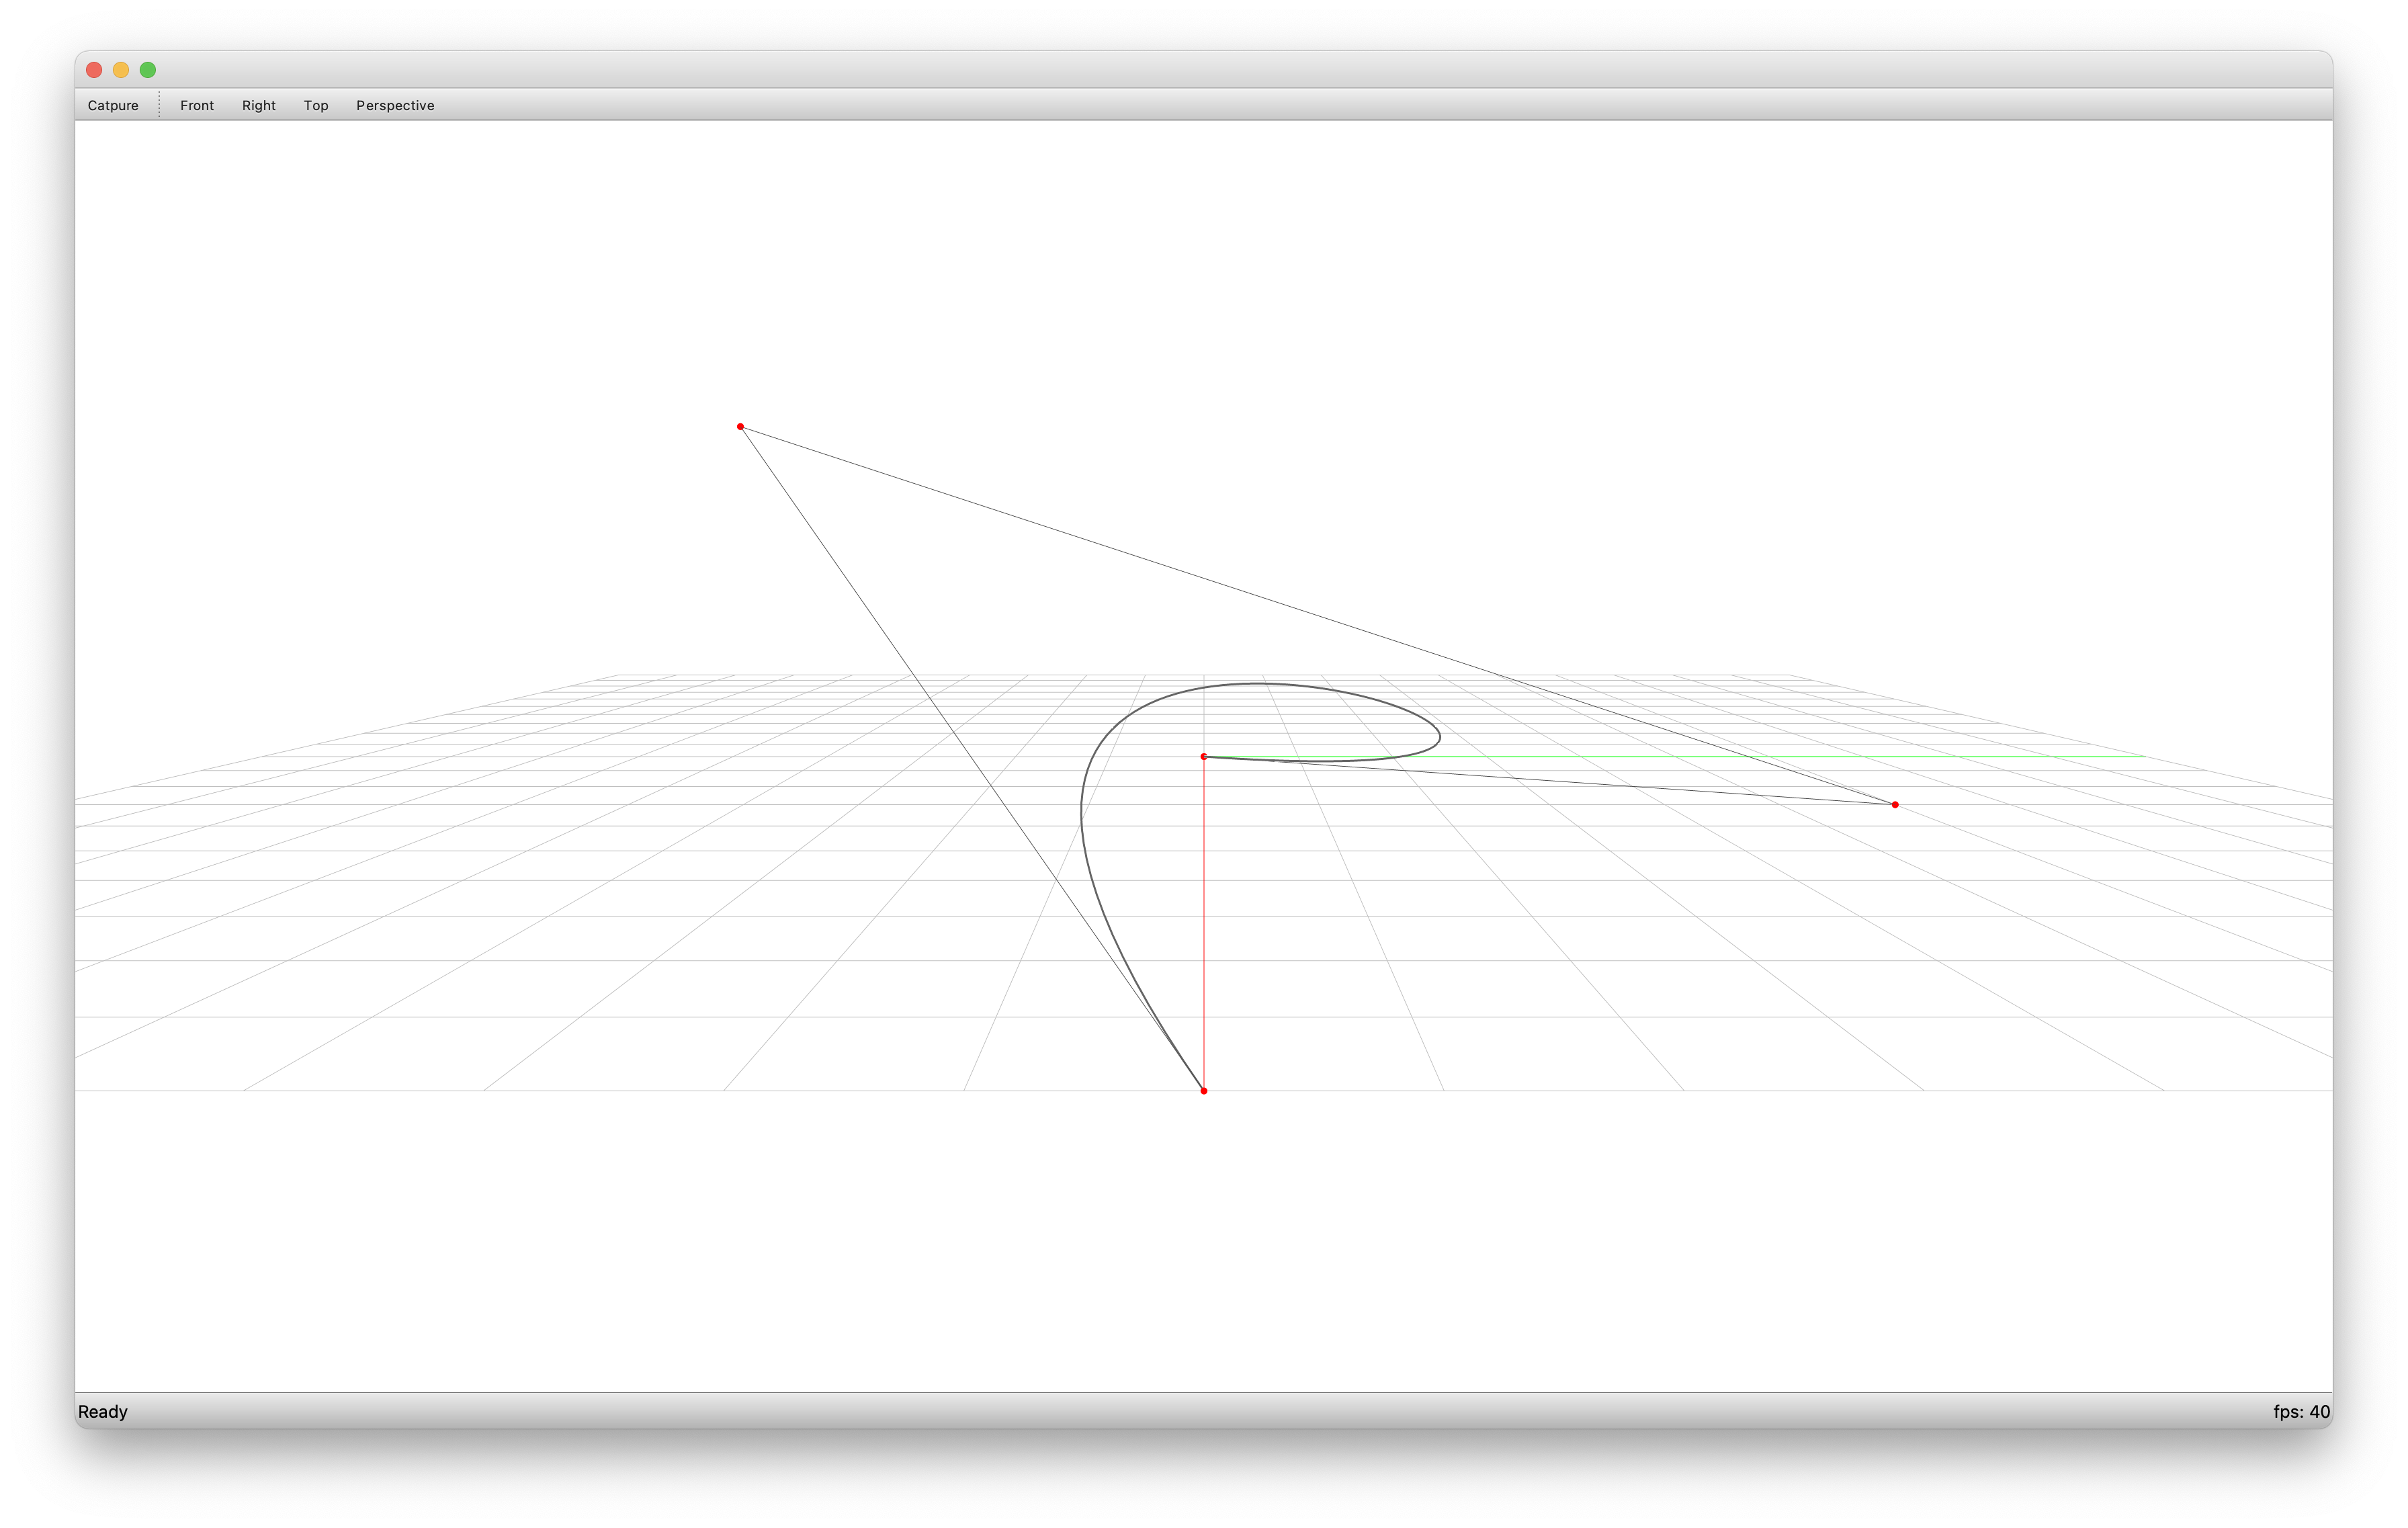 ../../_images/example_curve_from_parameters.png